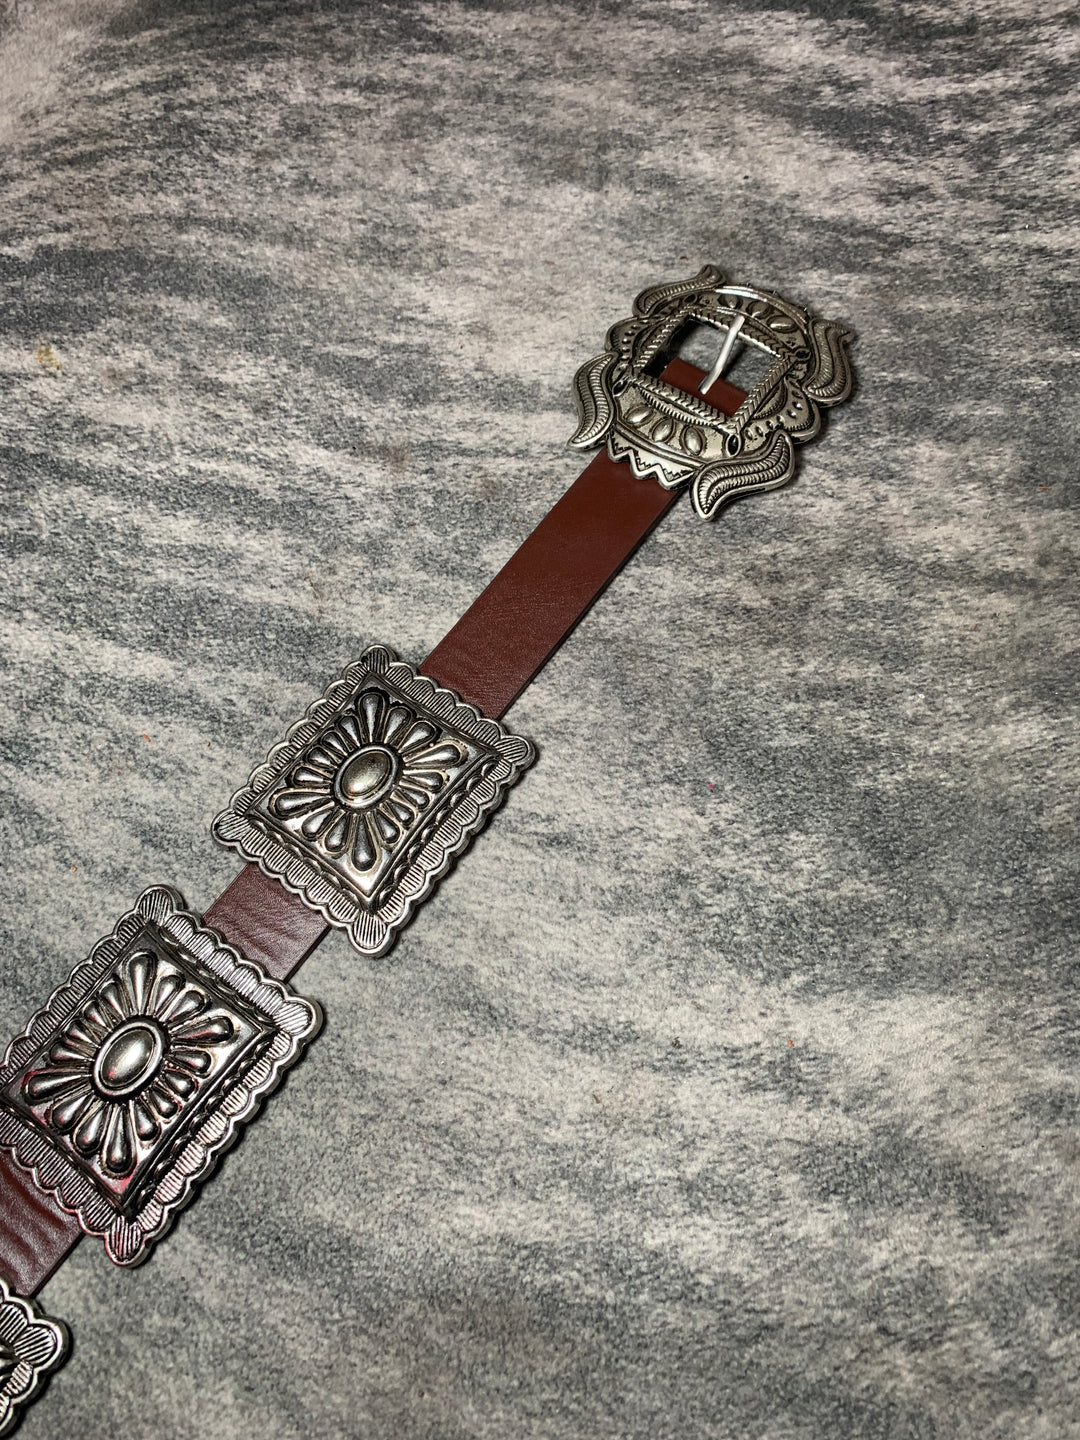 Brown Leather Concho Belt